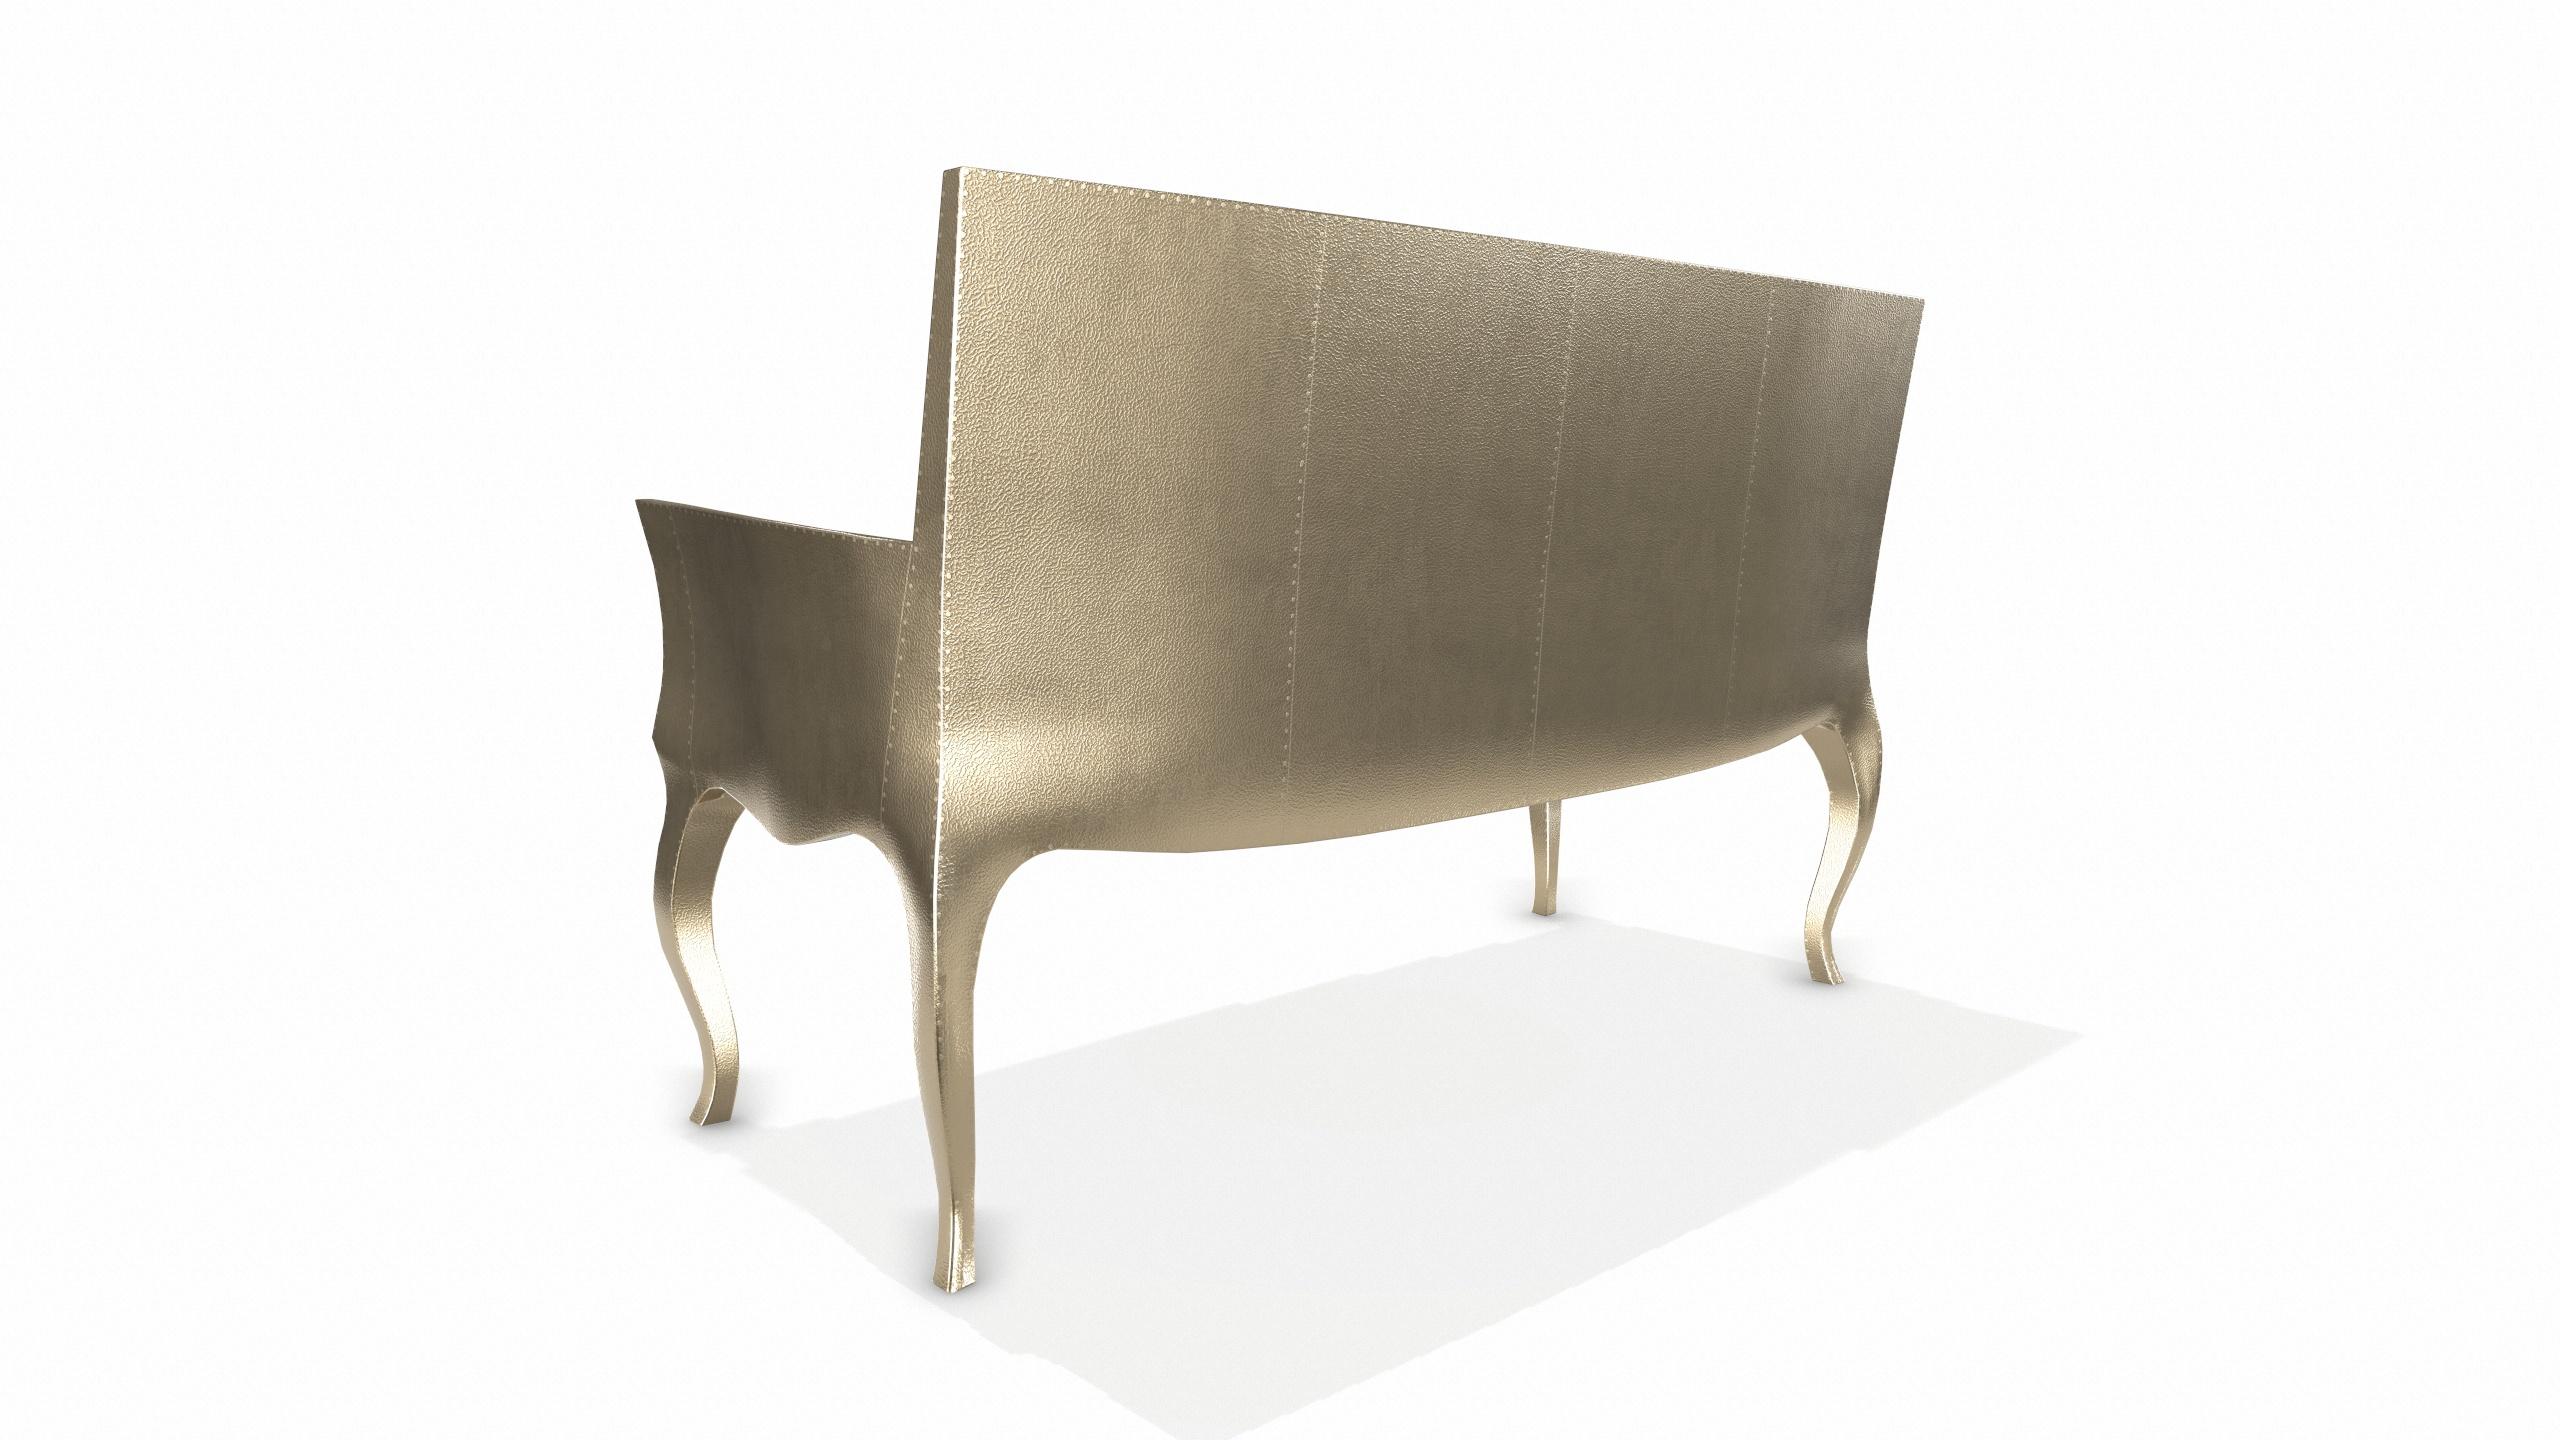 Other Louise Settee Art Deco Chaise Longues in Fine Hammered Brass by Paul Mathieu For Sale